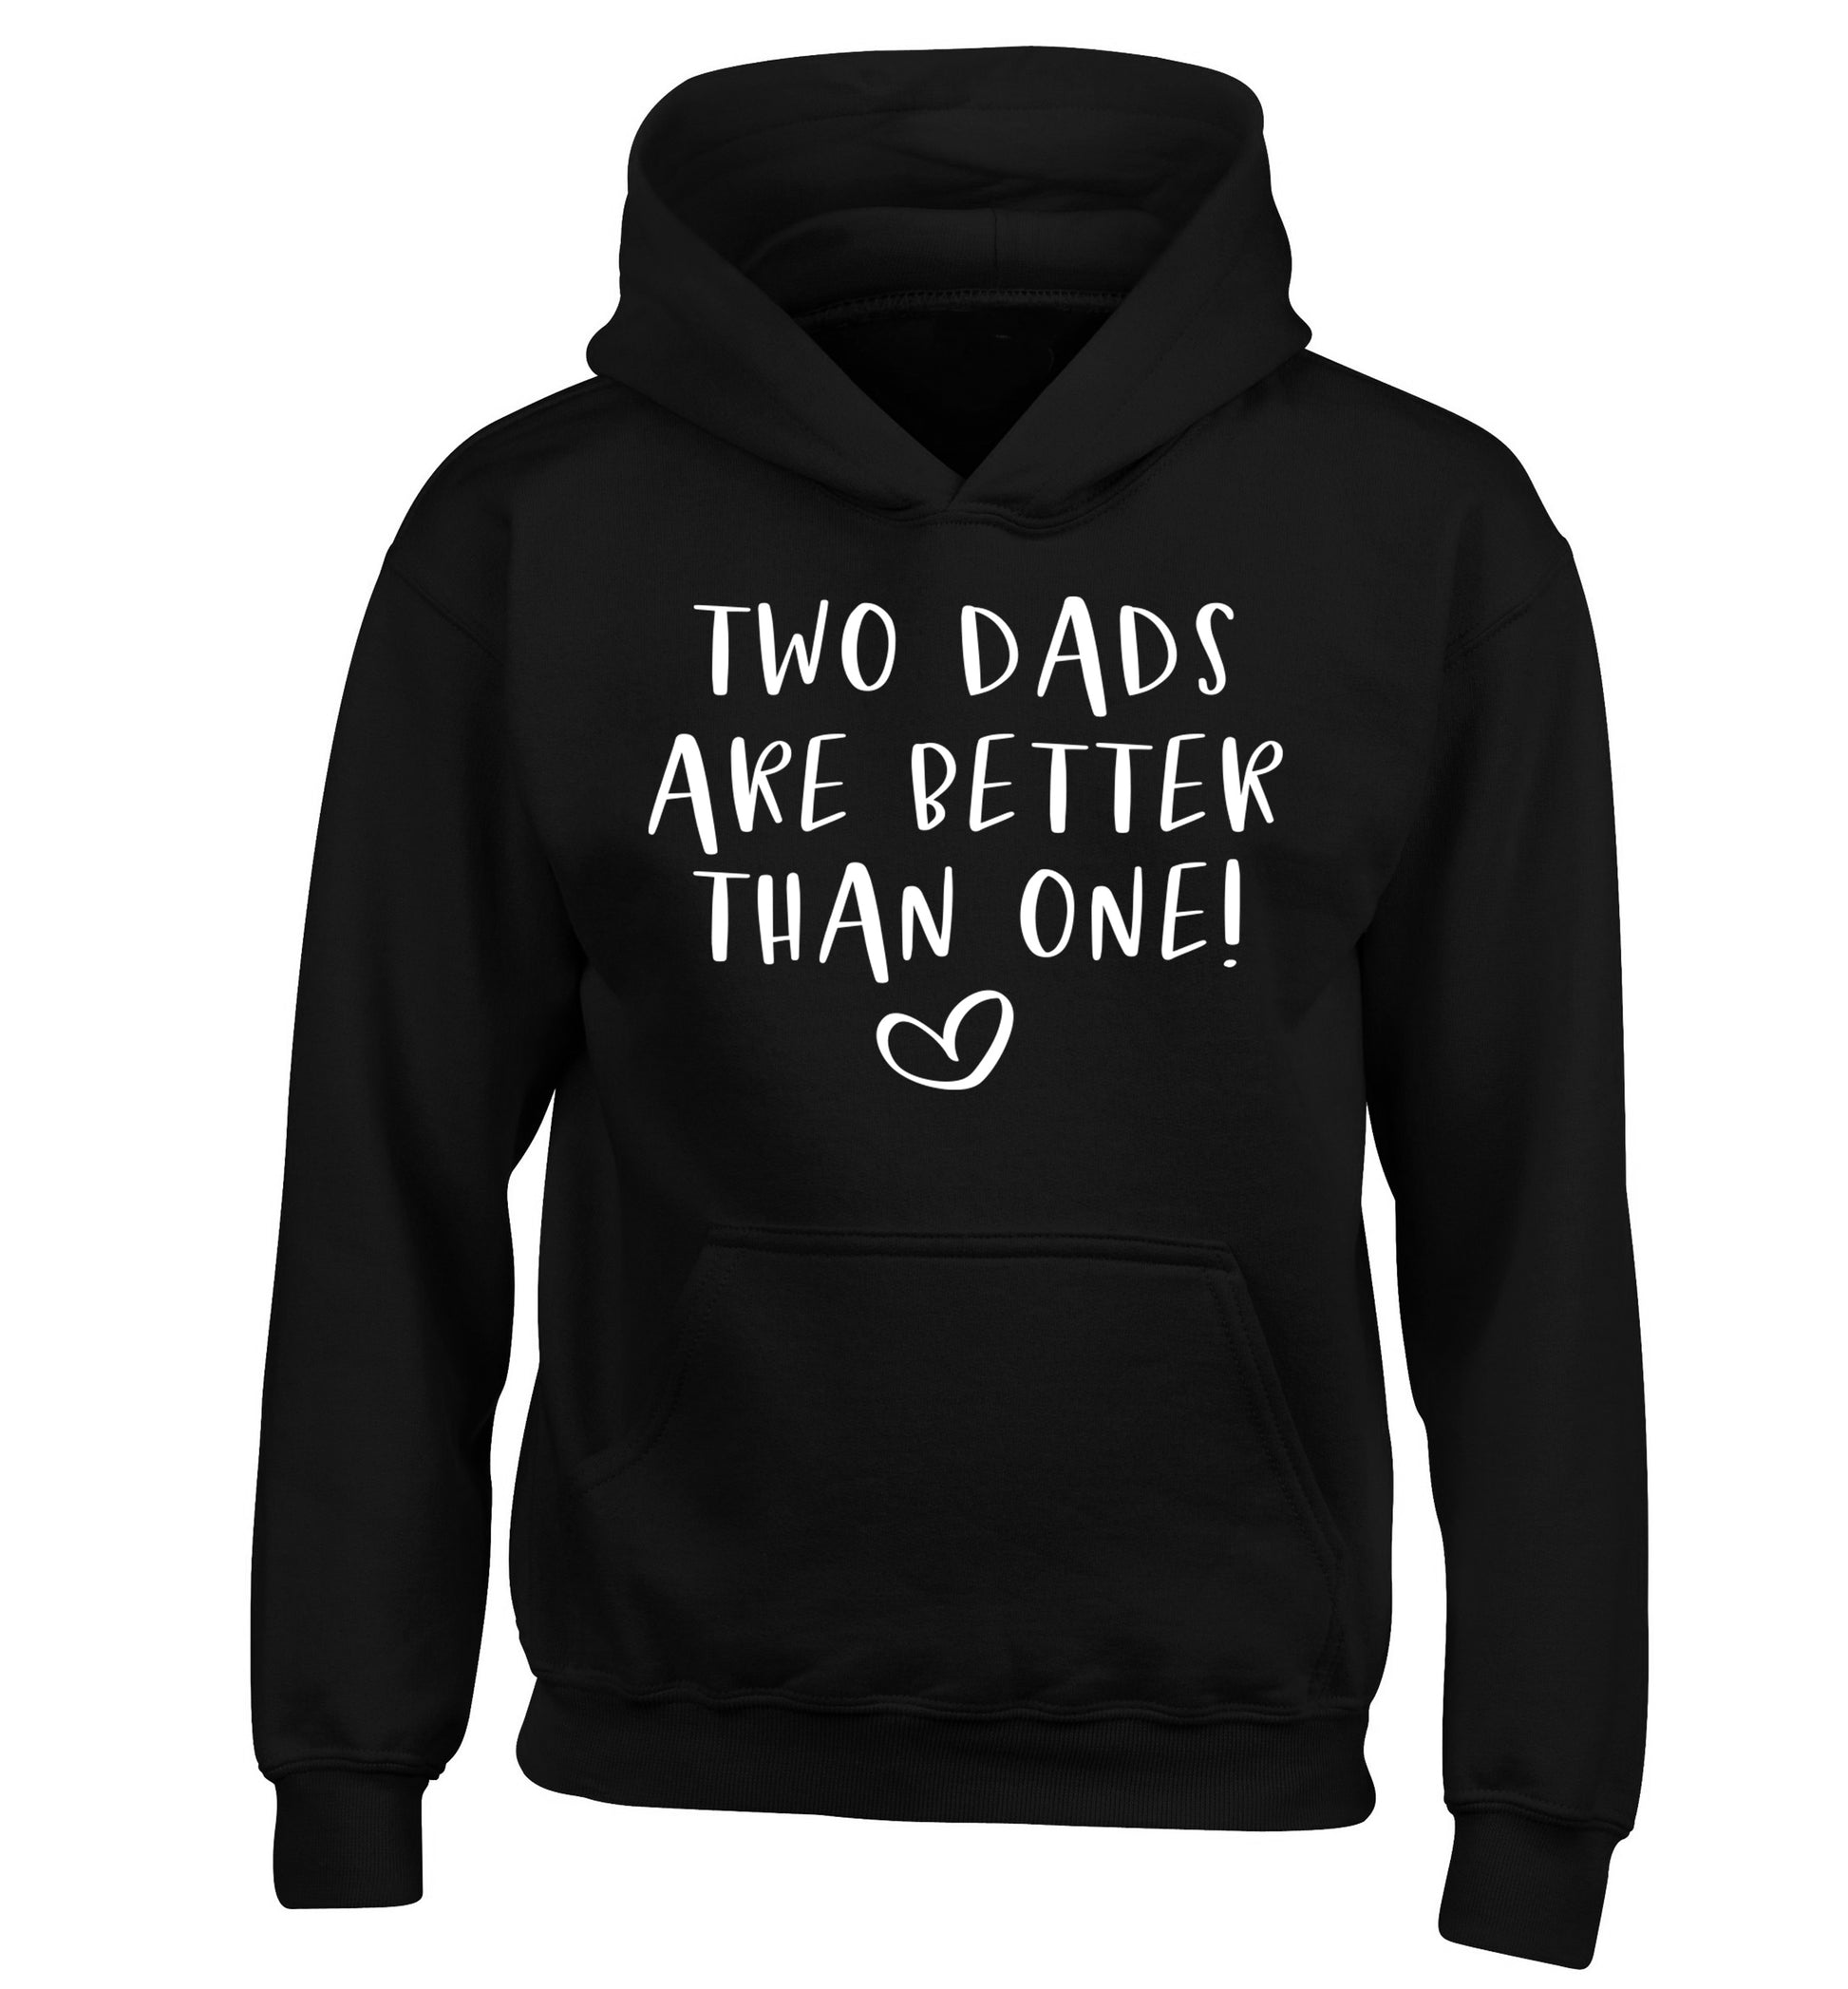 Two dads are better than one children's black hoodie 12-13 Years